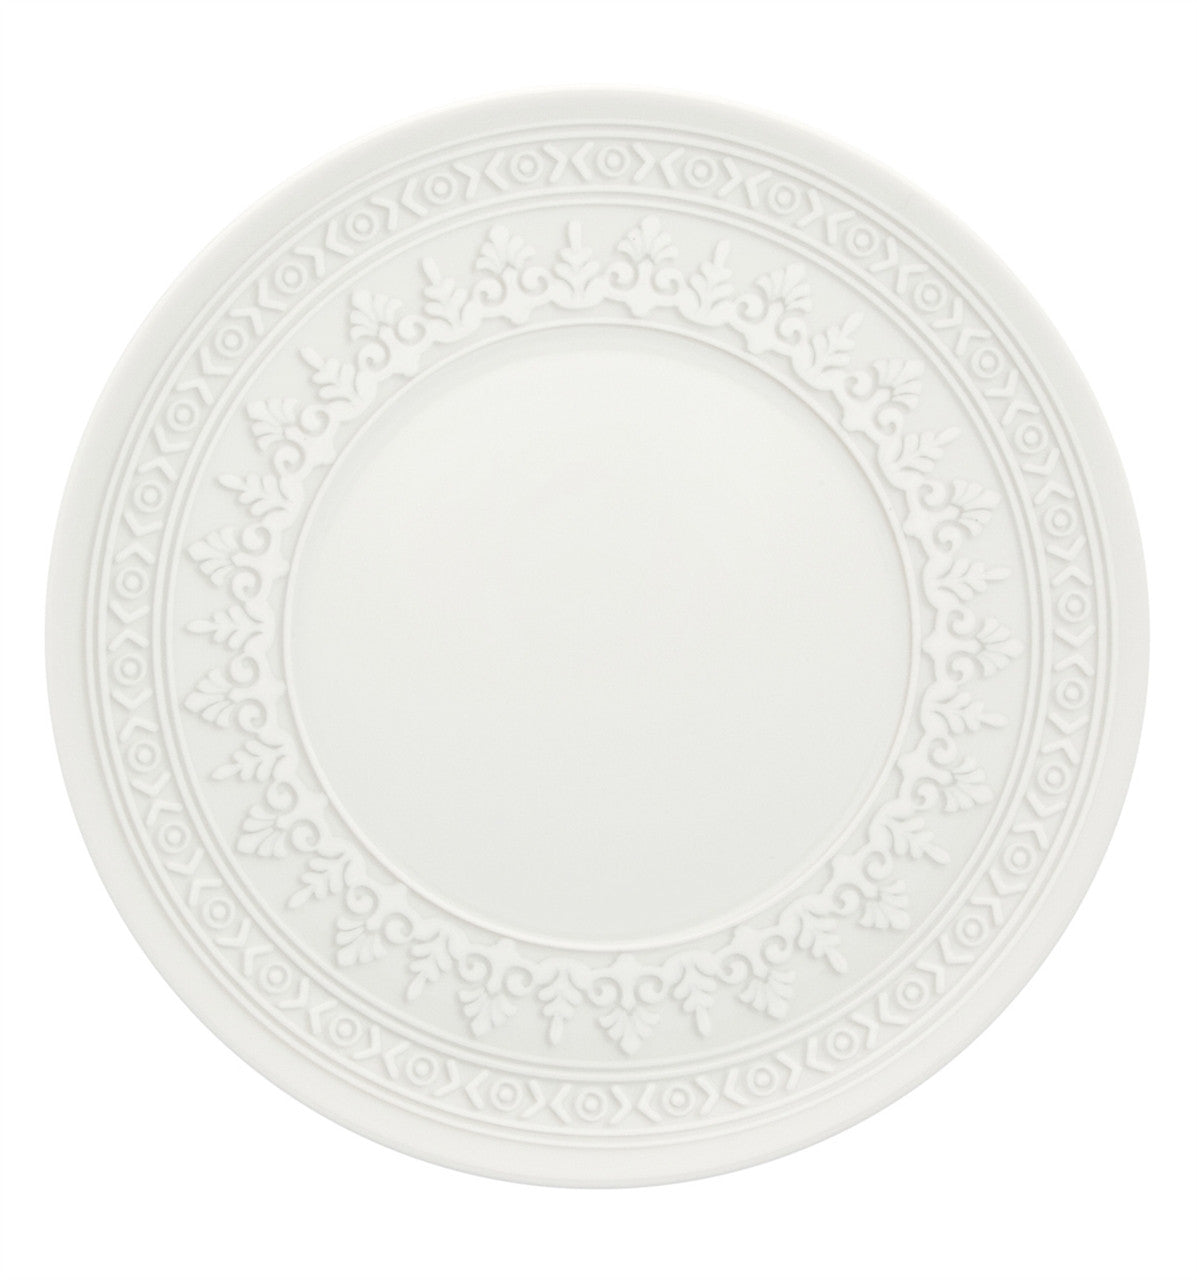 Ornament Bread & Butter Plate - RSVP Style